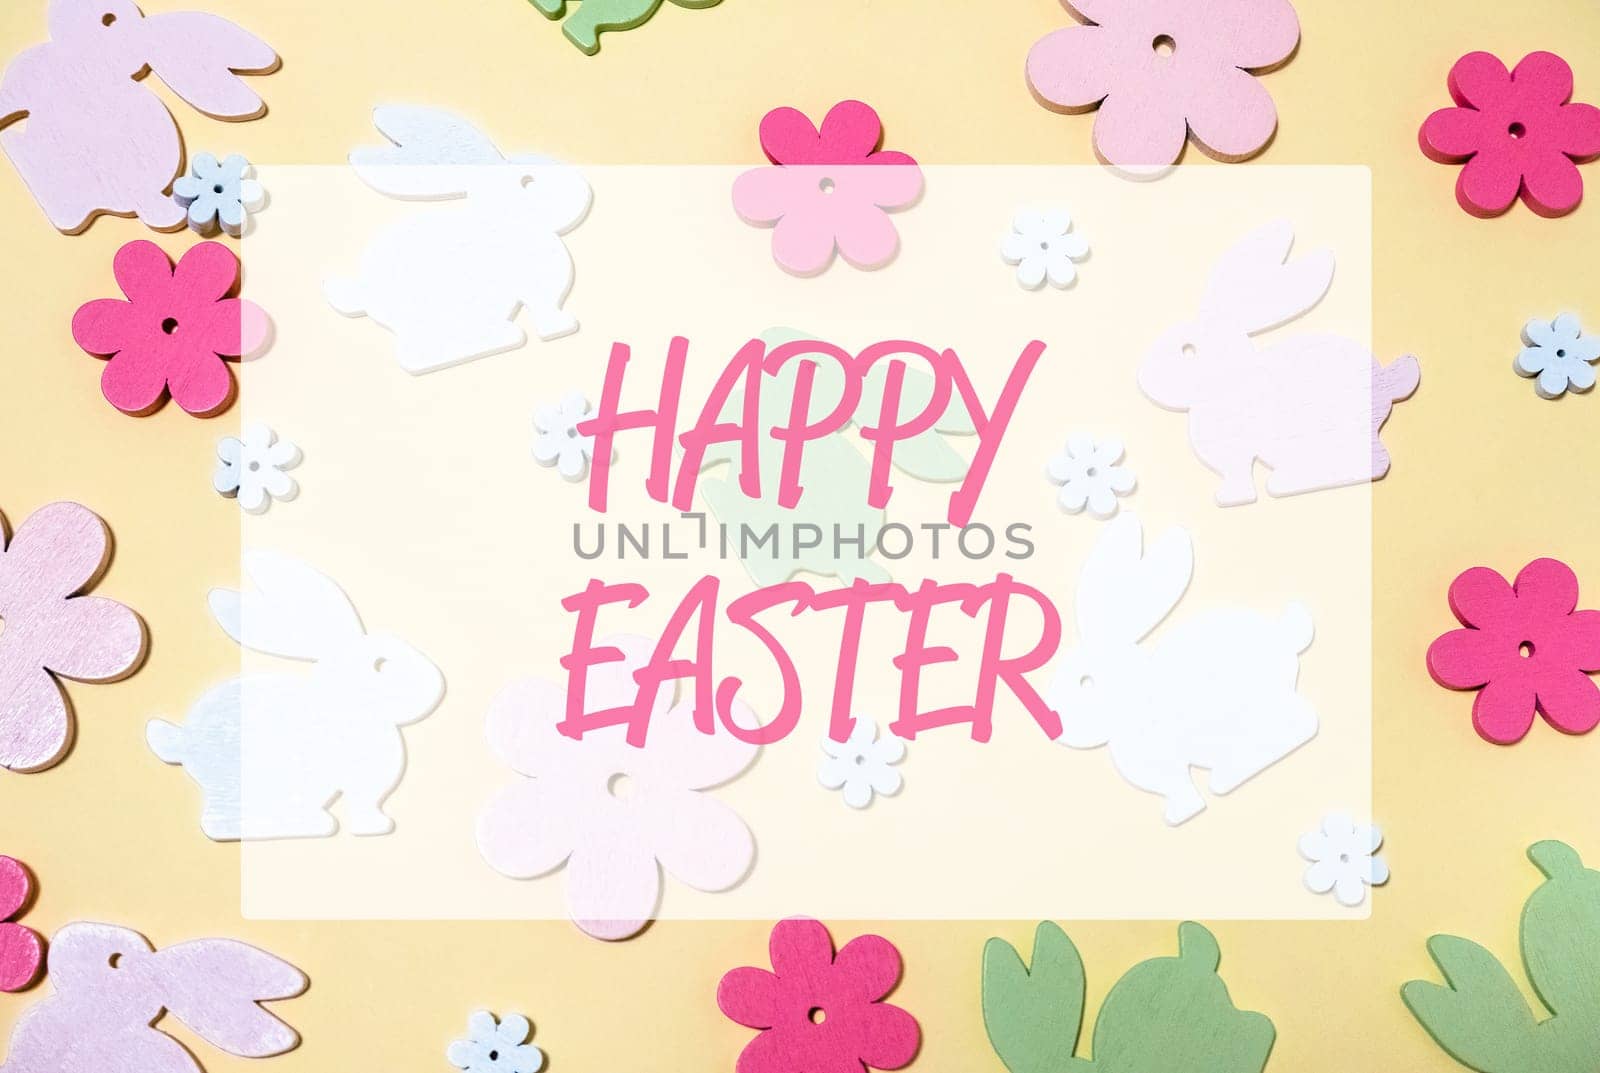 creative template postcard in a festive style on a bright background with flowers text. Flat lay